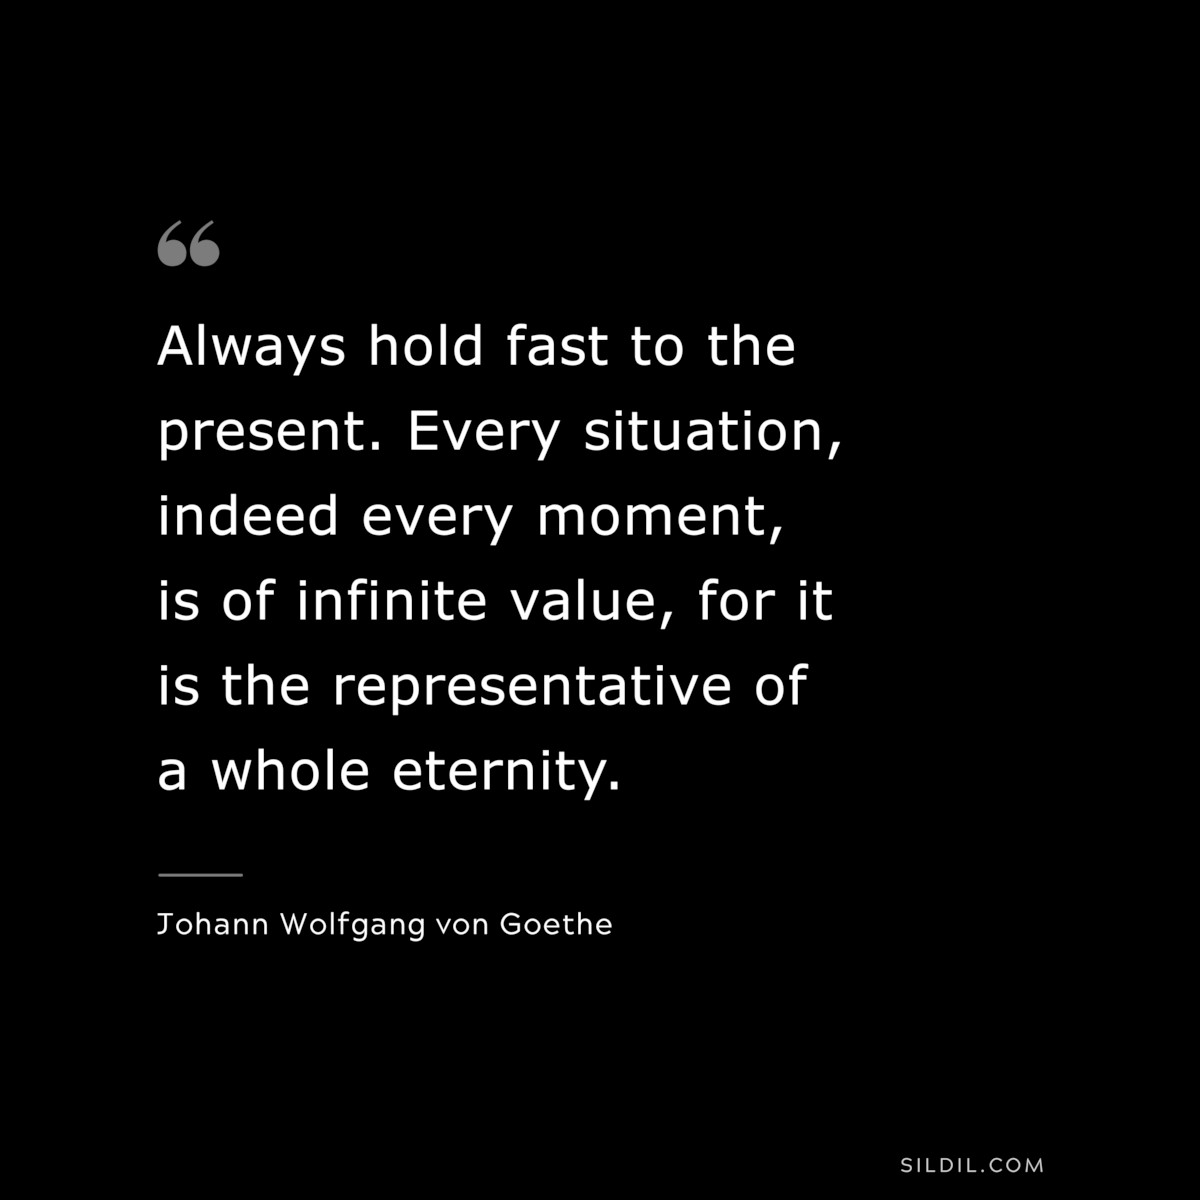 Always hold fast to the present. Every situation, indeed every moment, is of infinite value, for it is the representative of a whole eternity.― Johann Wolfgang von Goethe